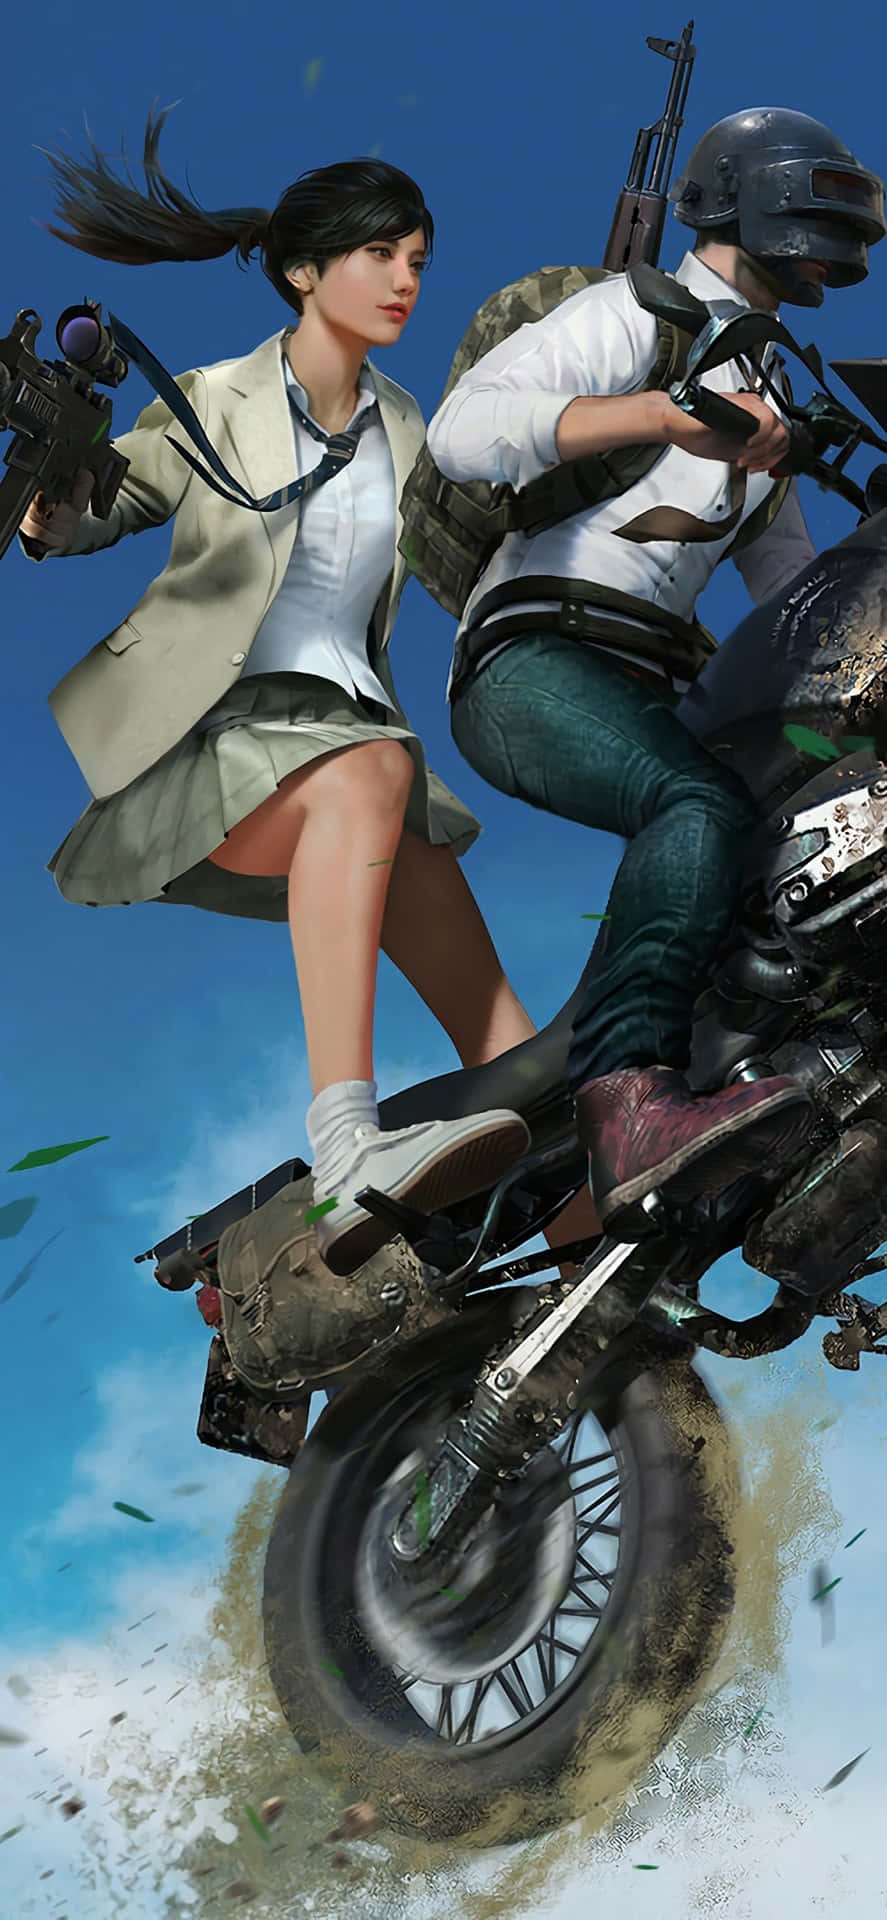 Pubg Girl Riding A Motorcycle Background